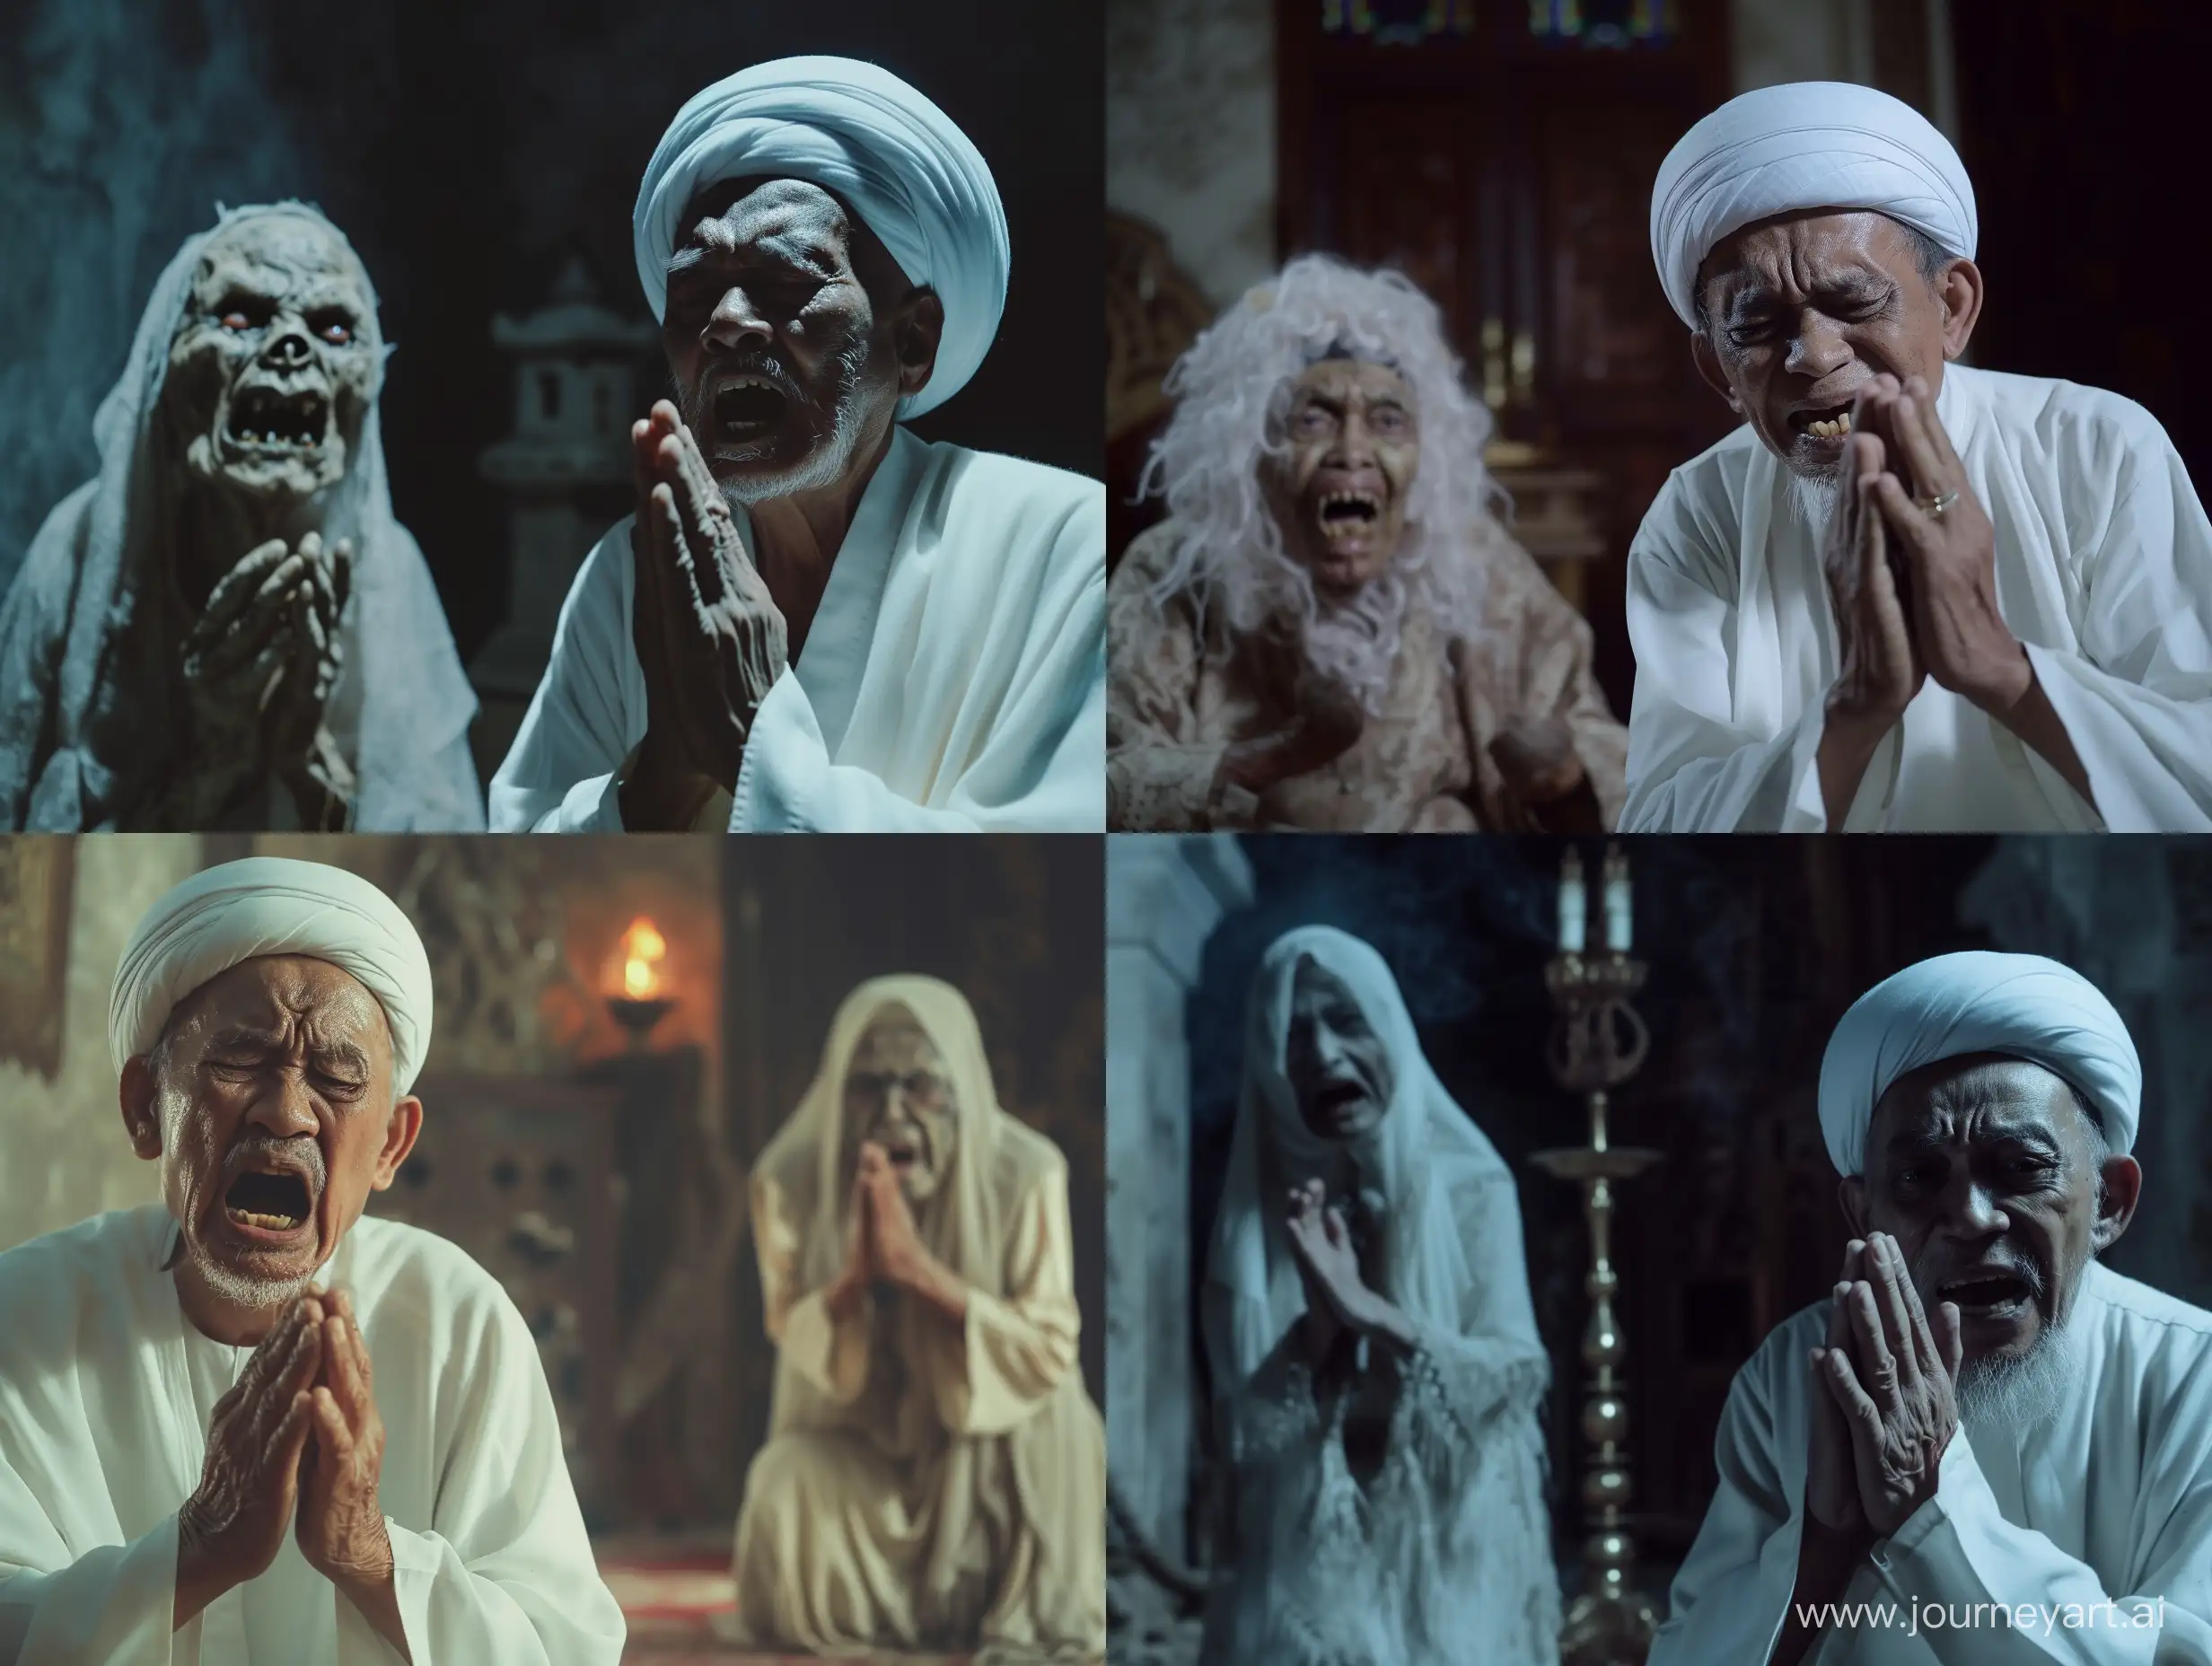 a an old Indonesian Muslim man wearing a white robe and white turban is praying, in front of him is the ghost of a scary old grandmother hysterically. horor movie scene 